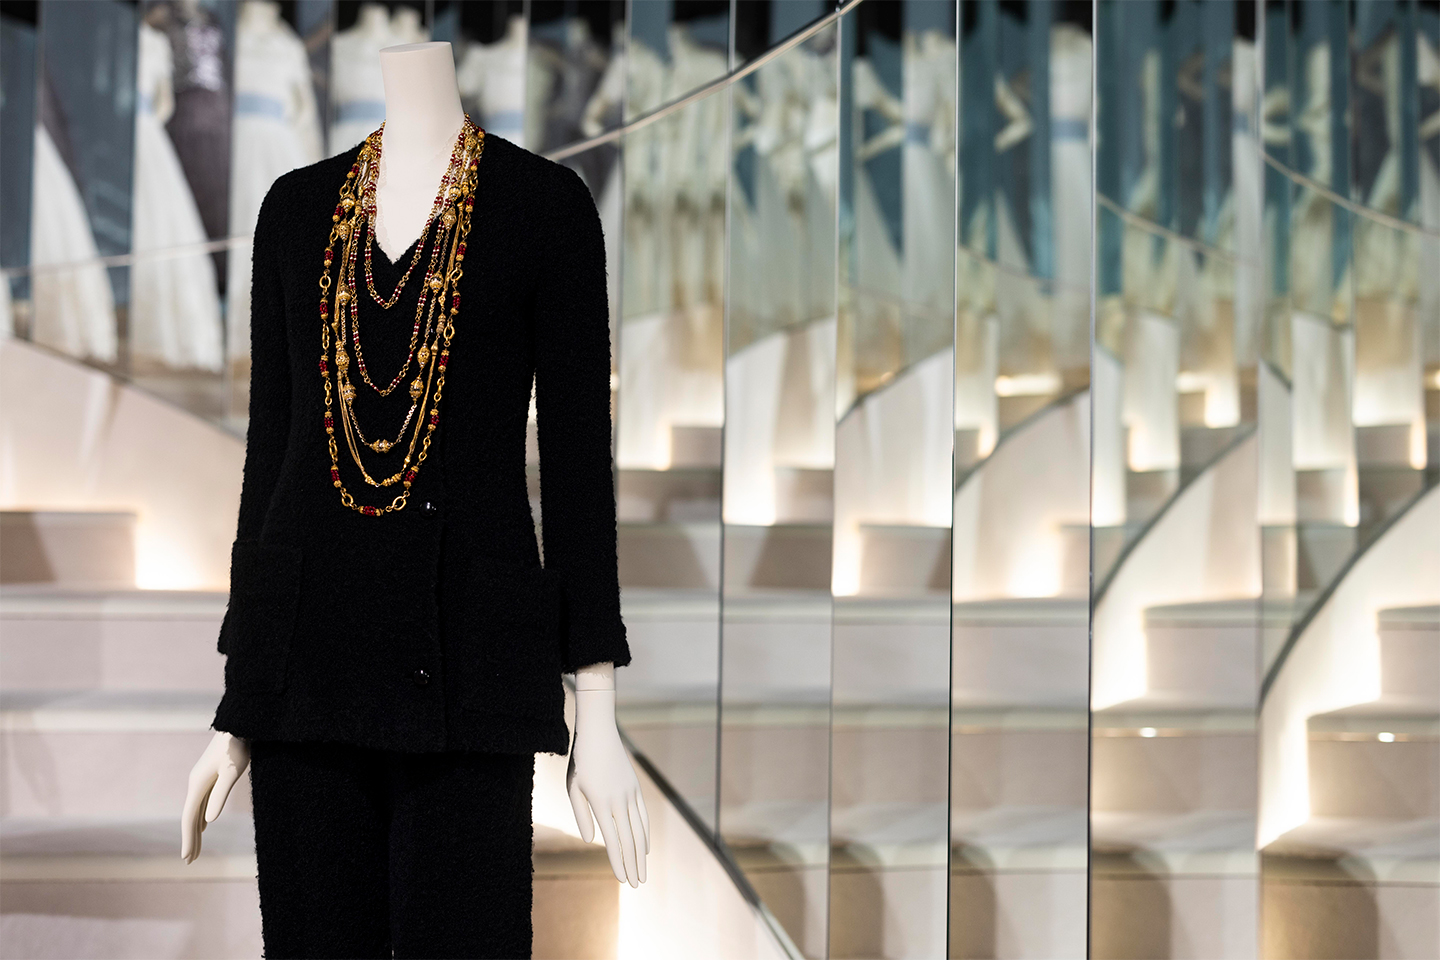 ‘Gabrielle Chanel. Fashion Manifesto’ at the V&A © Victoria and Albert Museum, London